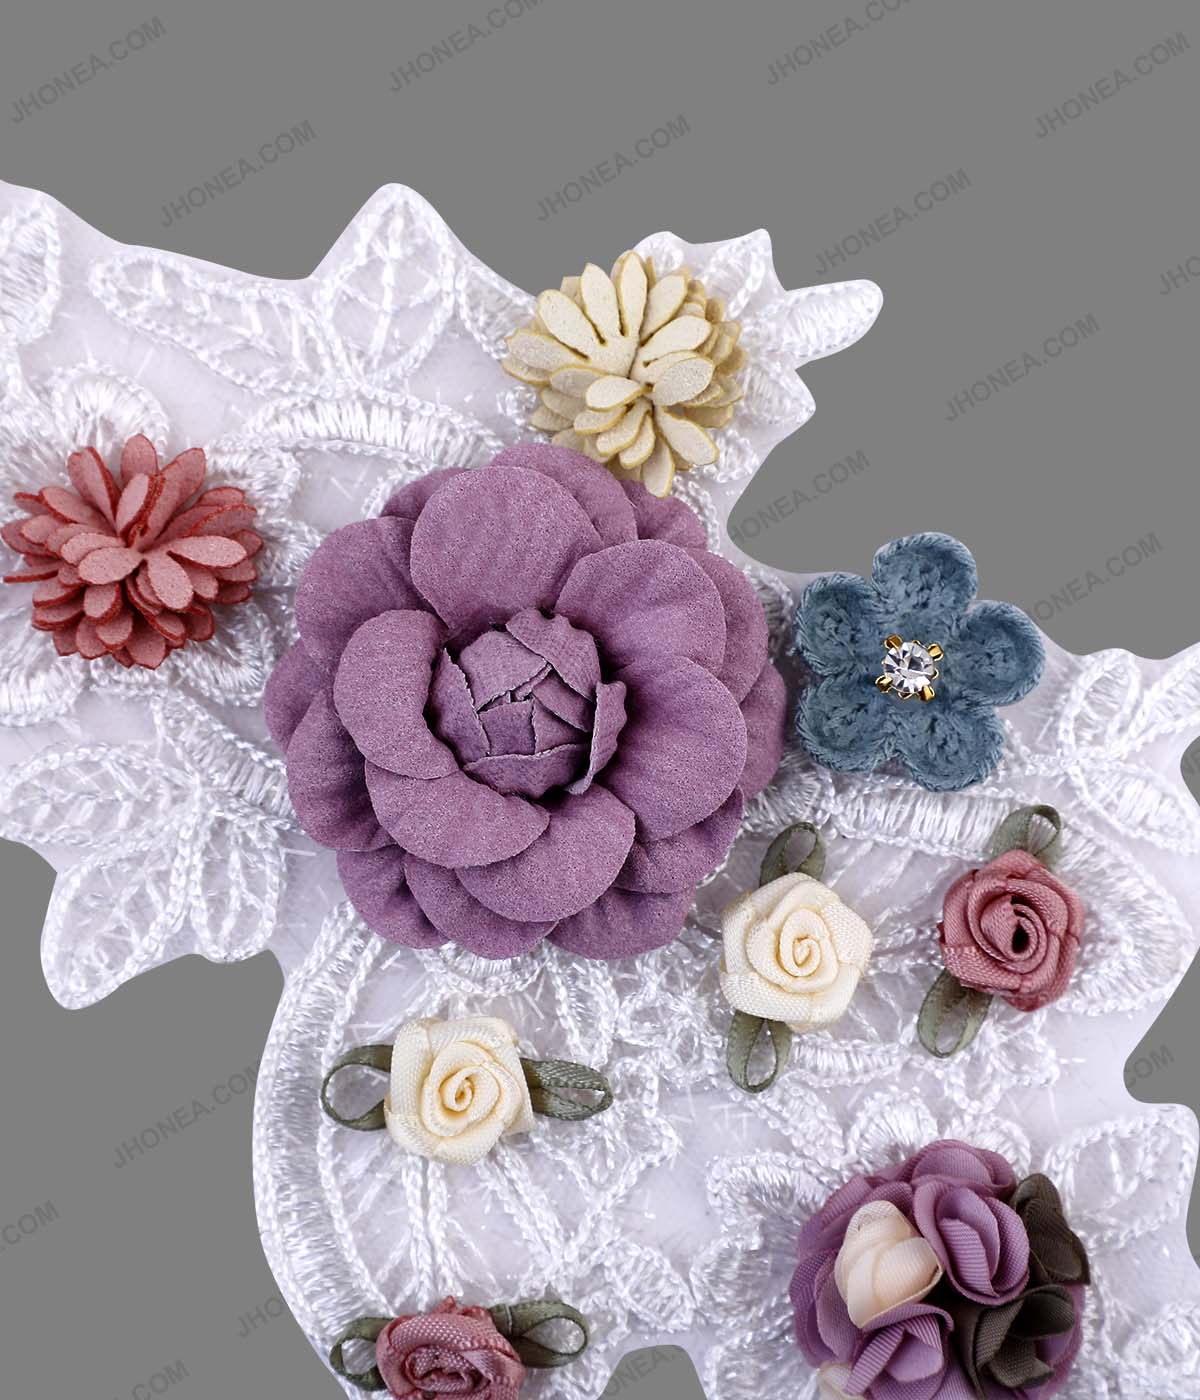 White Patch with Vibrant Colorful Flower Embroidery Patch